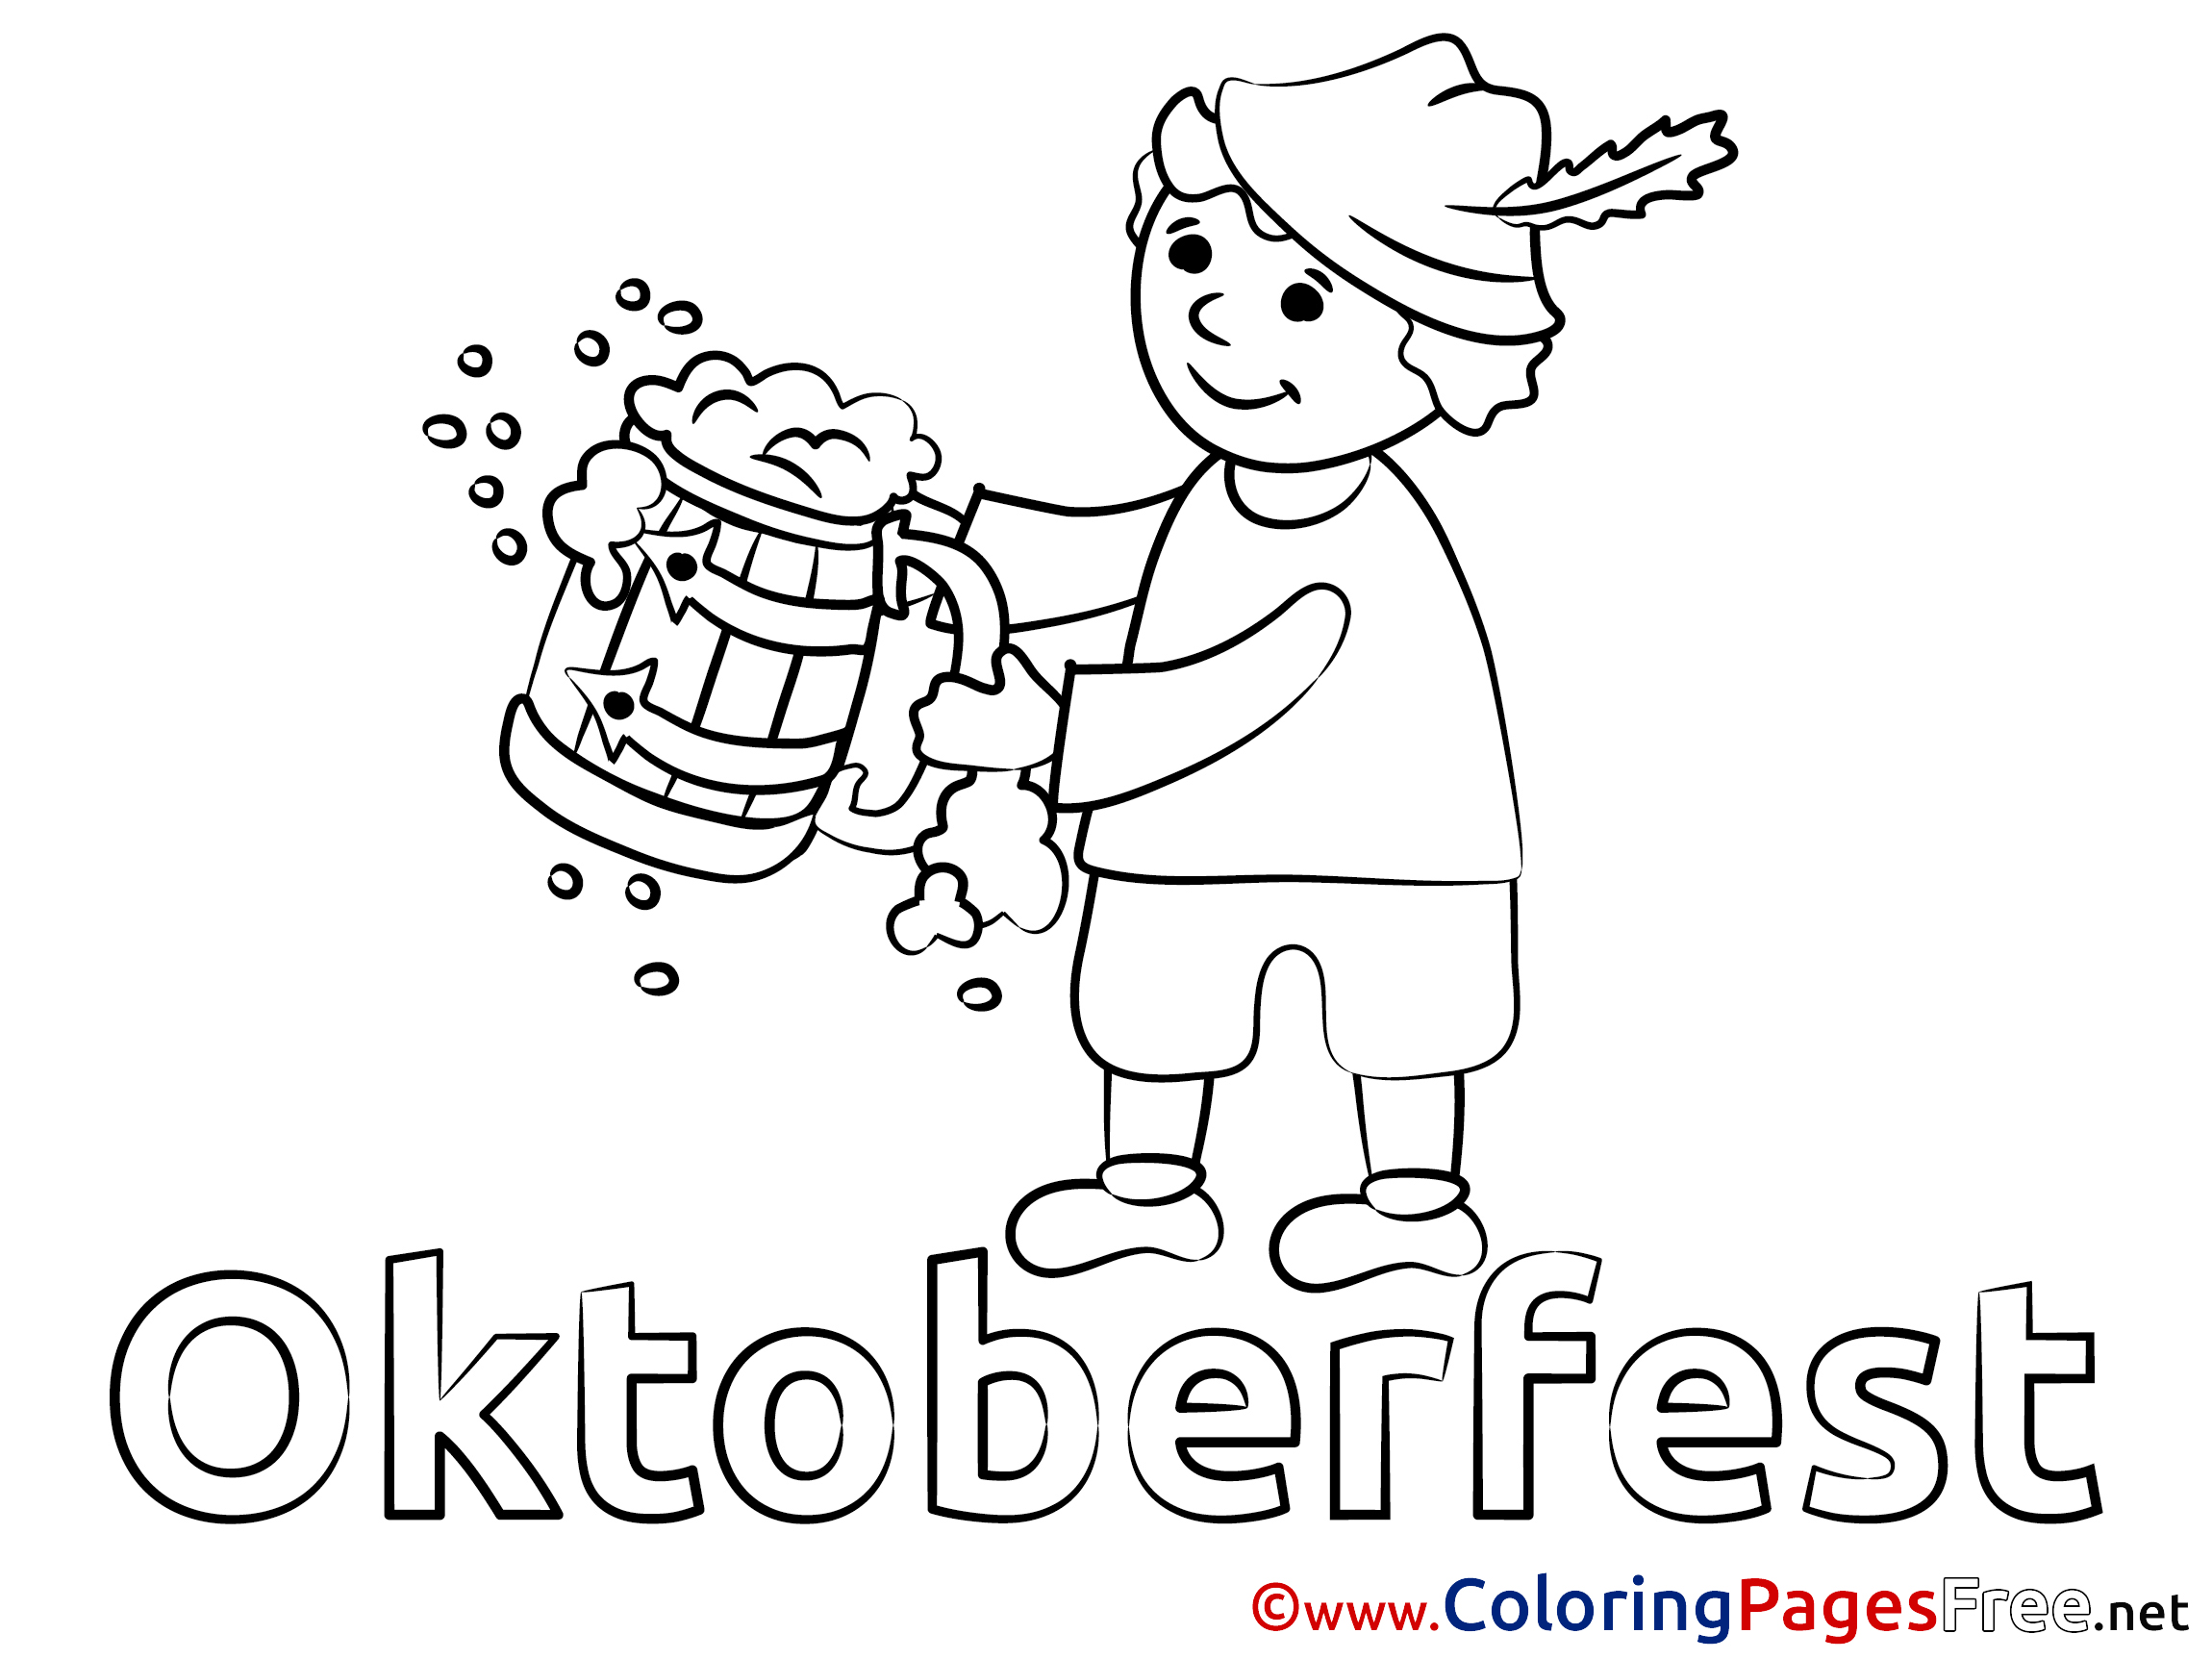 Oktoberfest Coloring Page Free